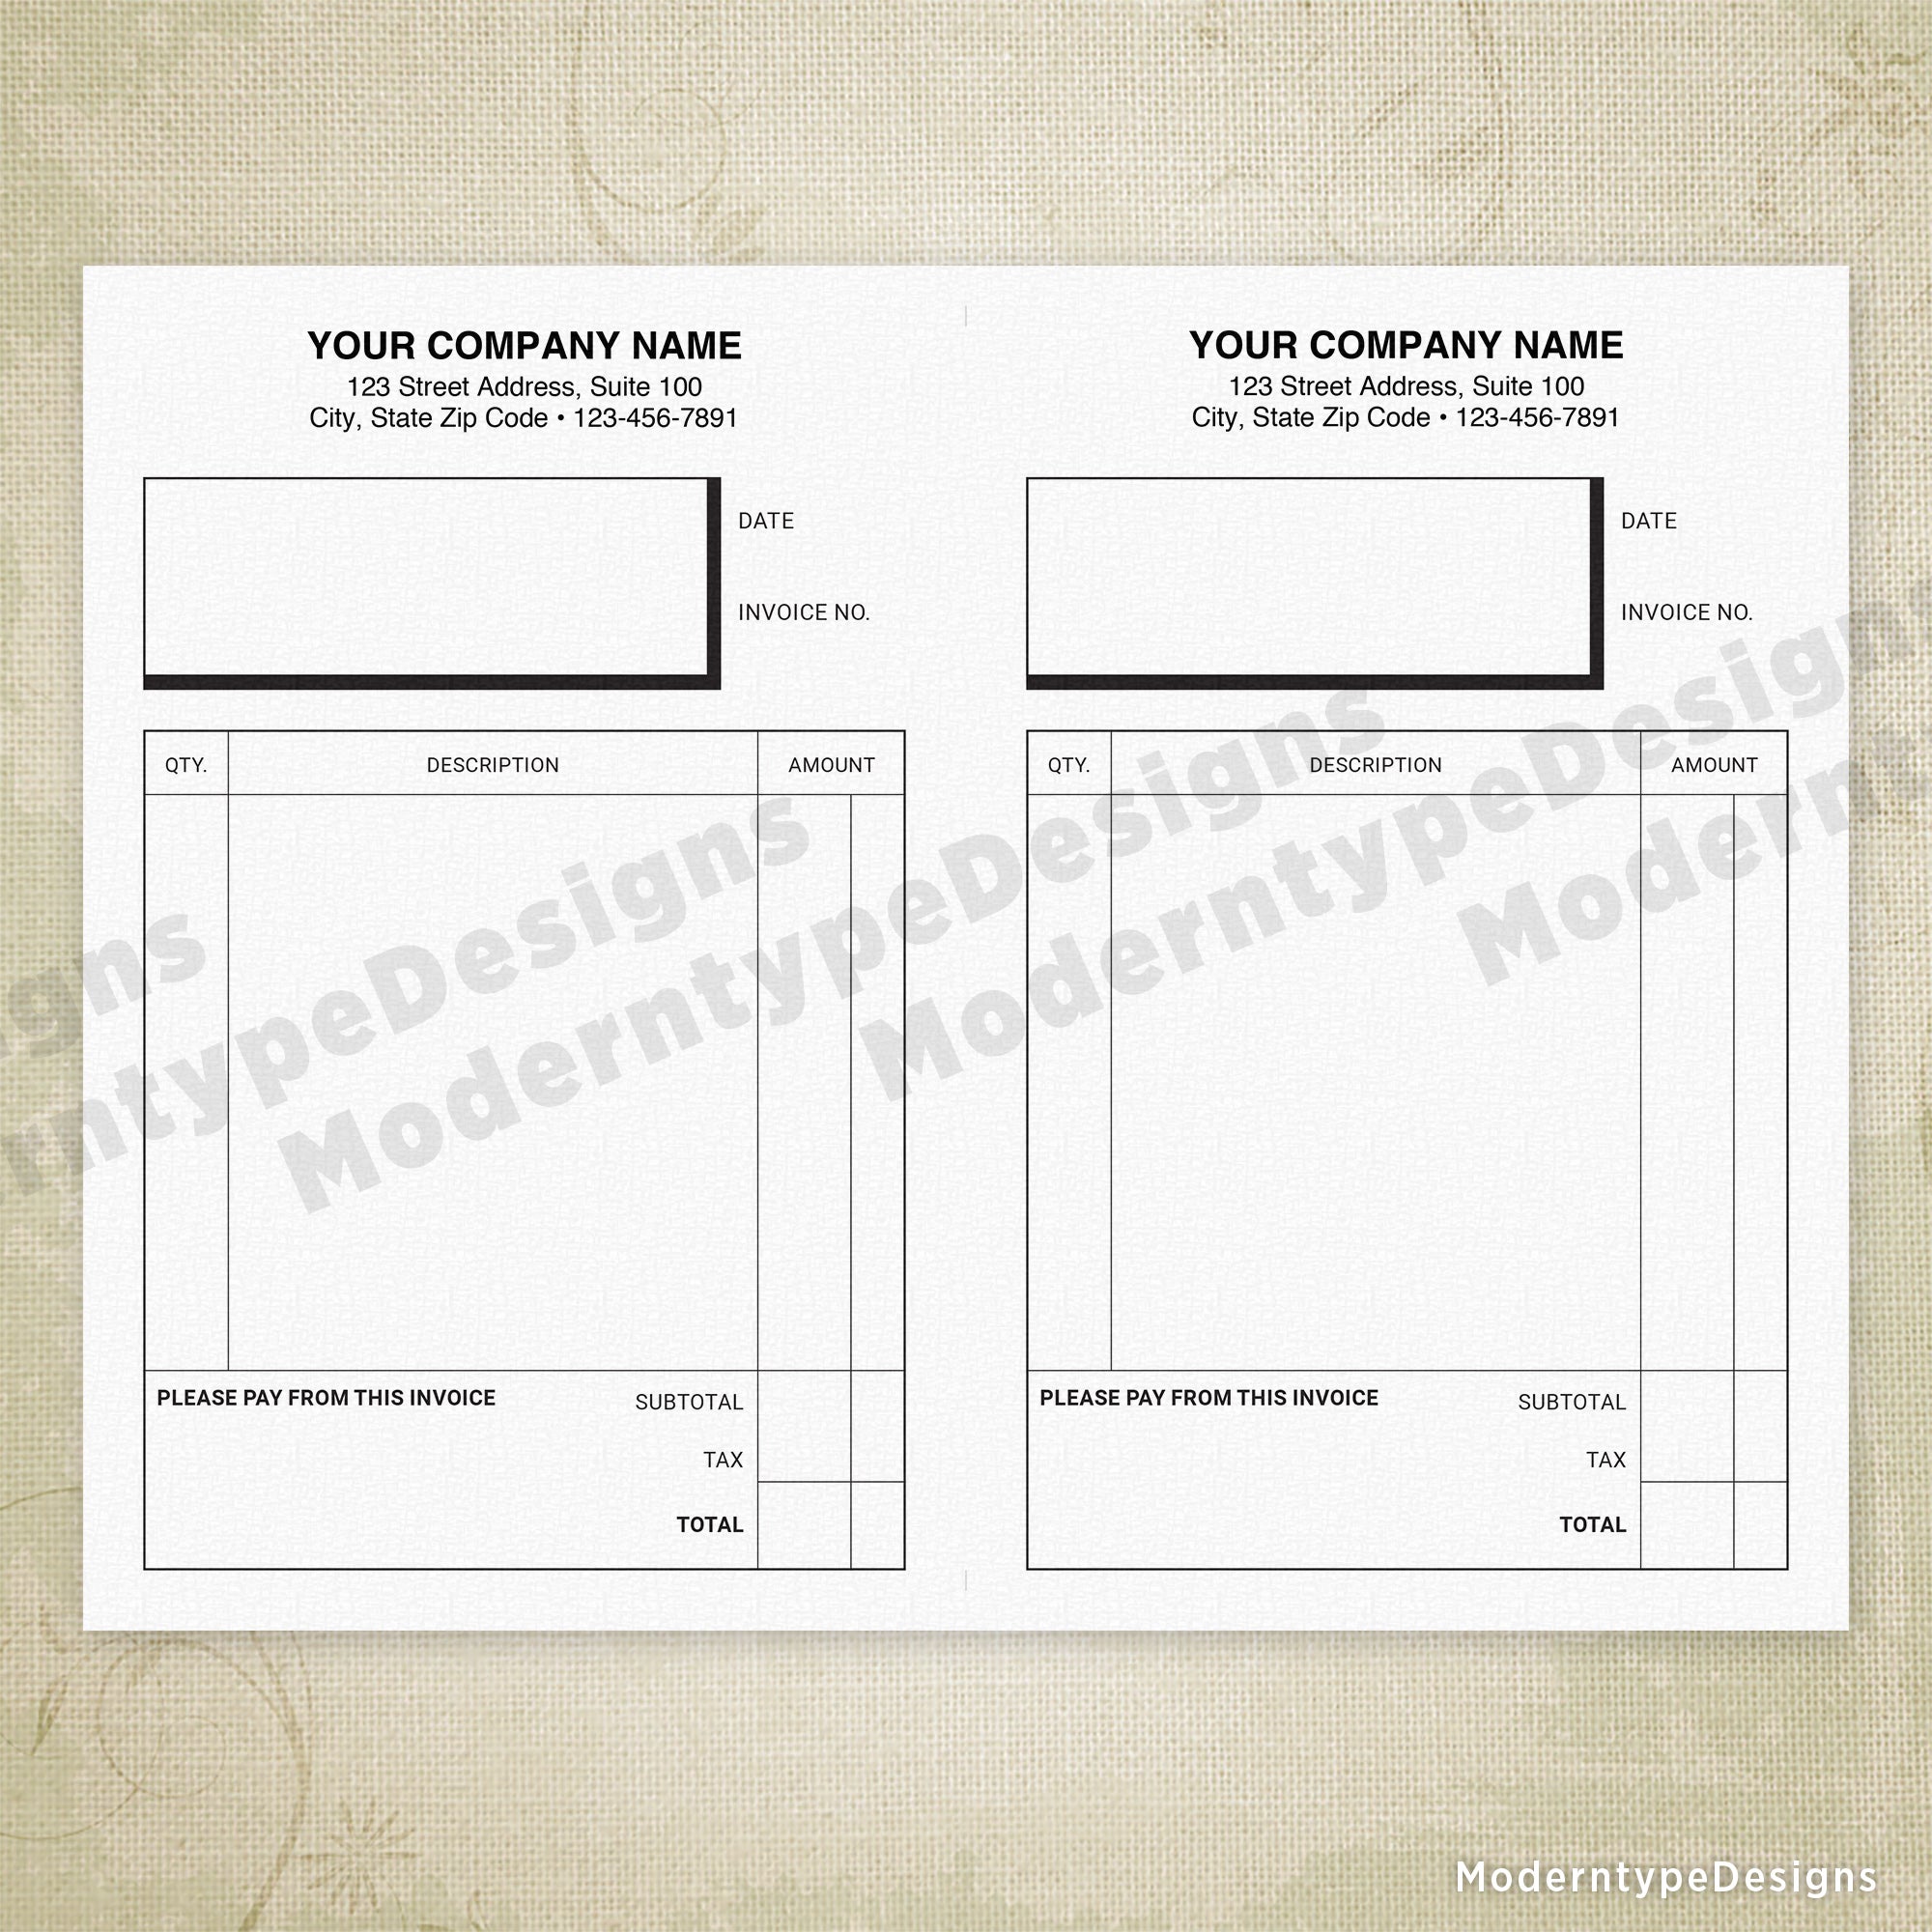 Invoice Form Printable, 5.5 x 8.5" Half Sheet, Personalized, #3